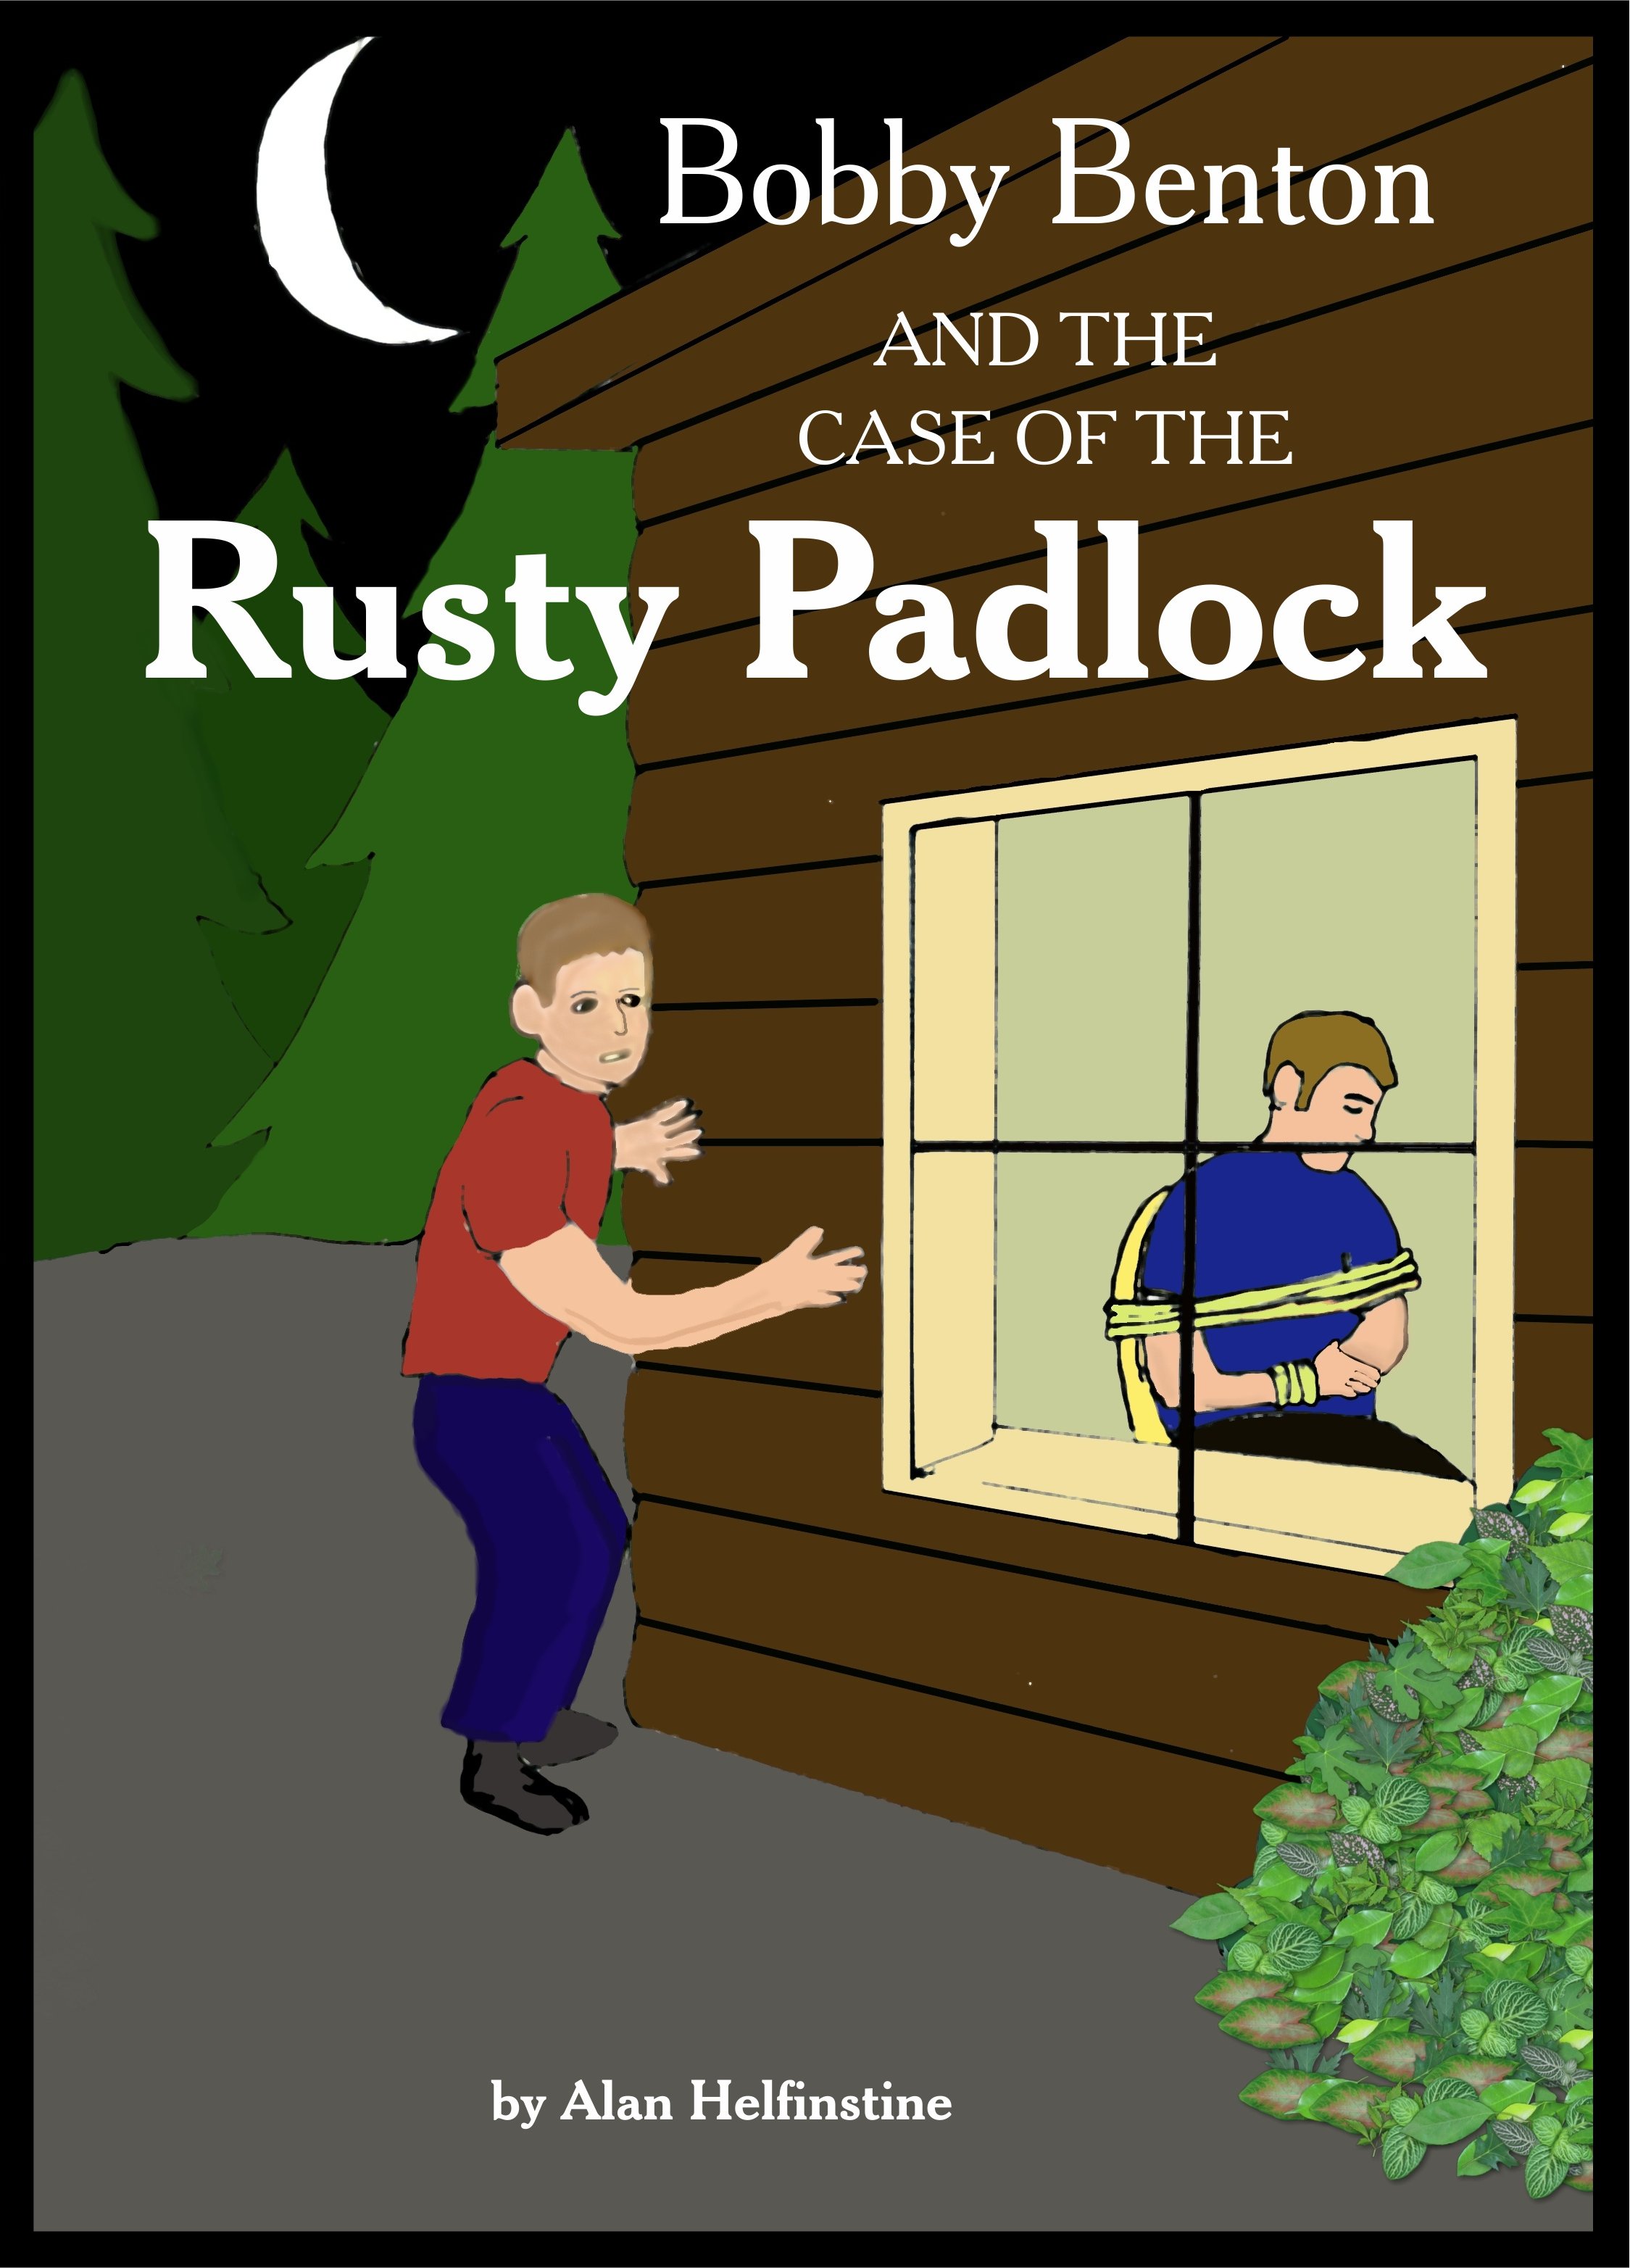 The Case of the Rusty Padlock